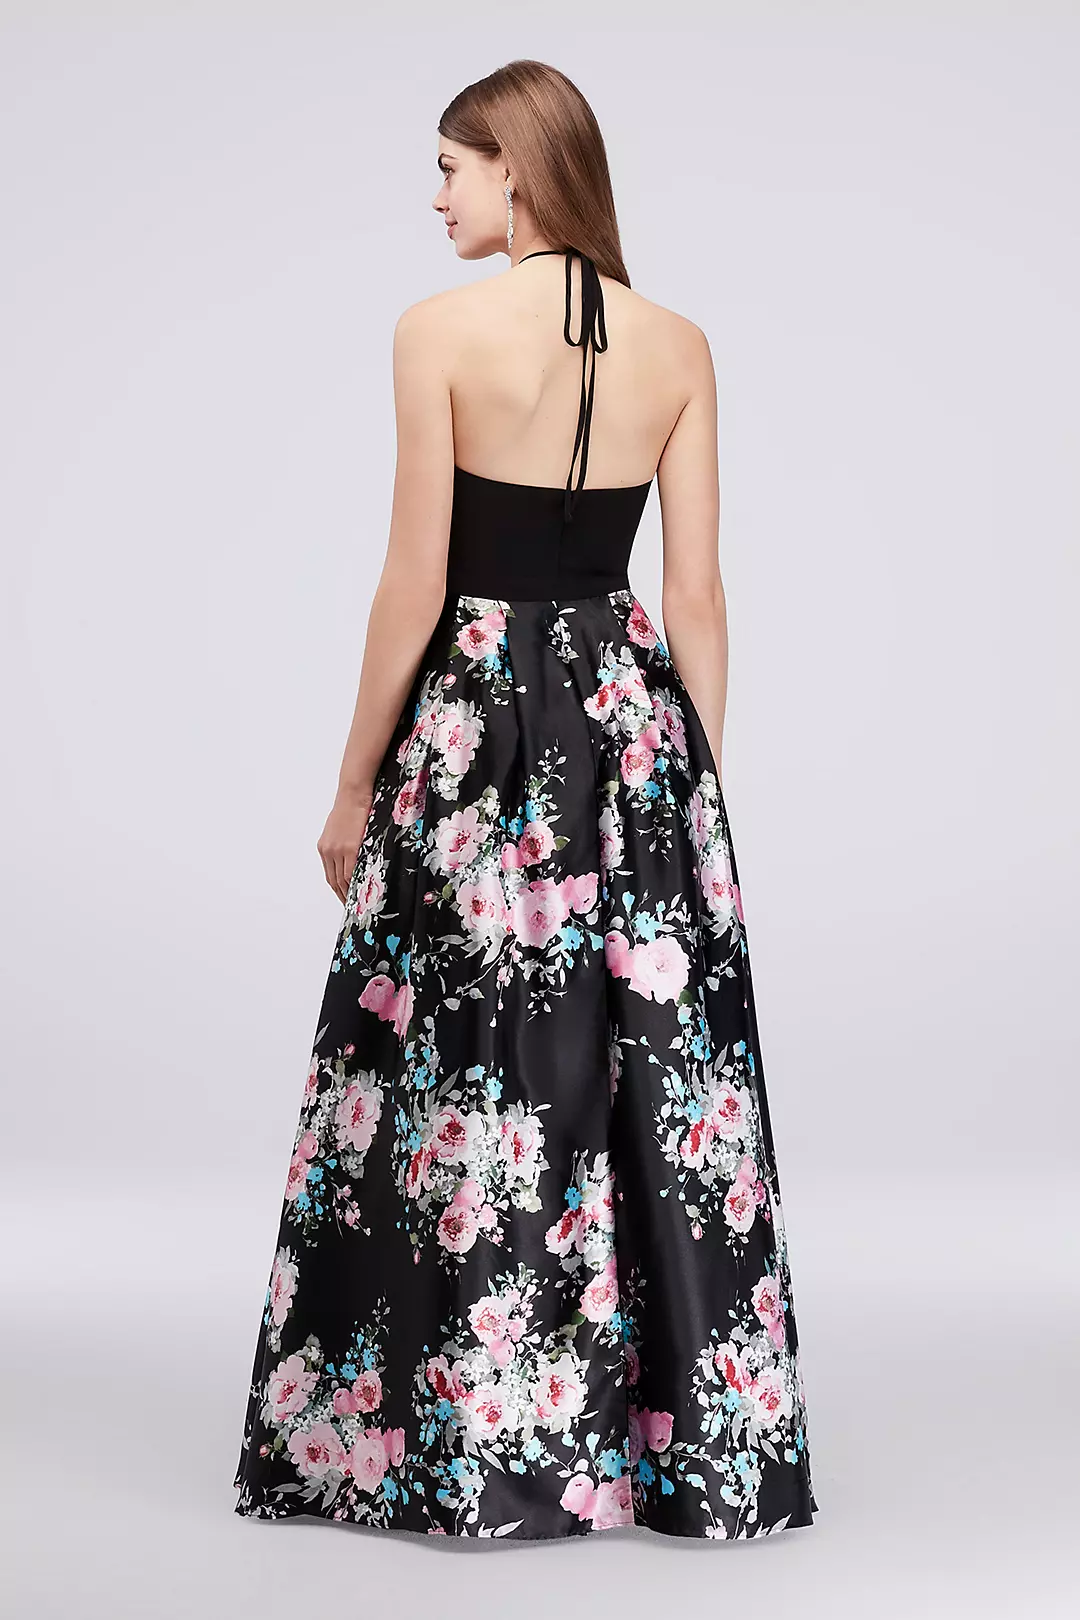 Jersey and Floral Satin Halter Ball Gown Image 2